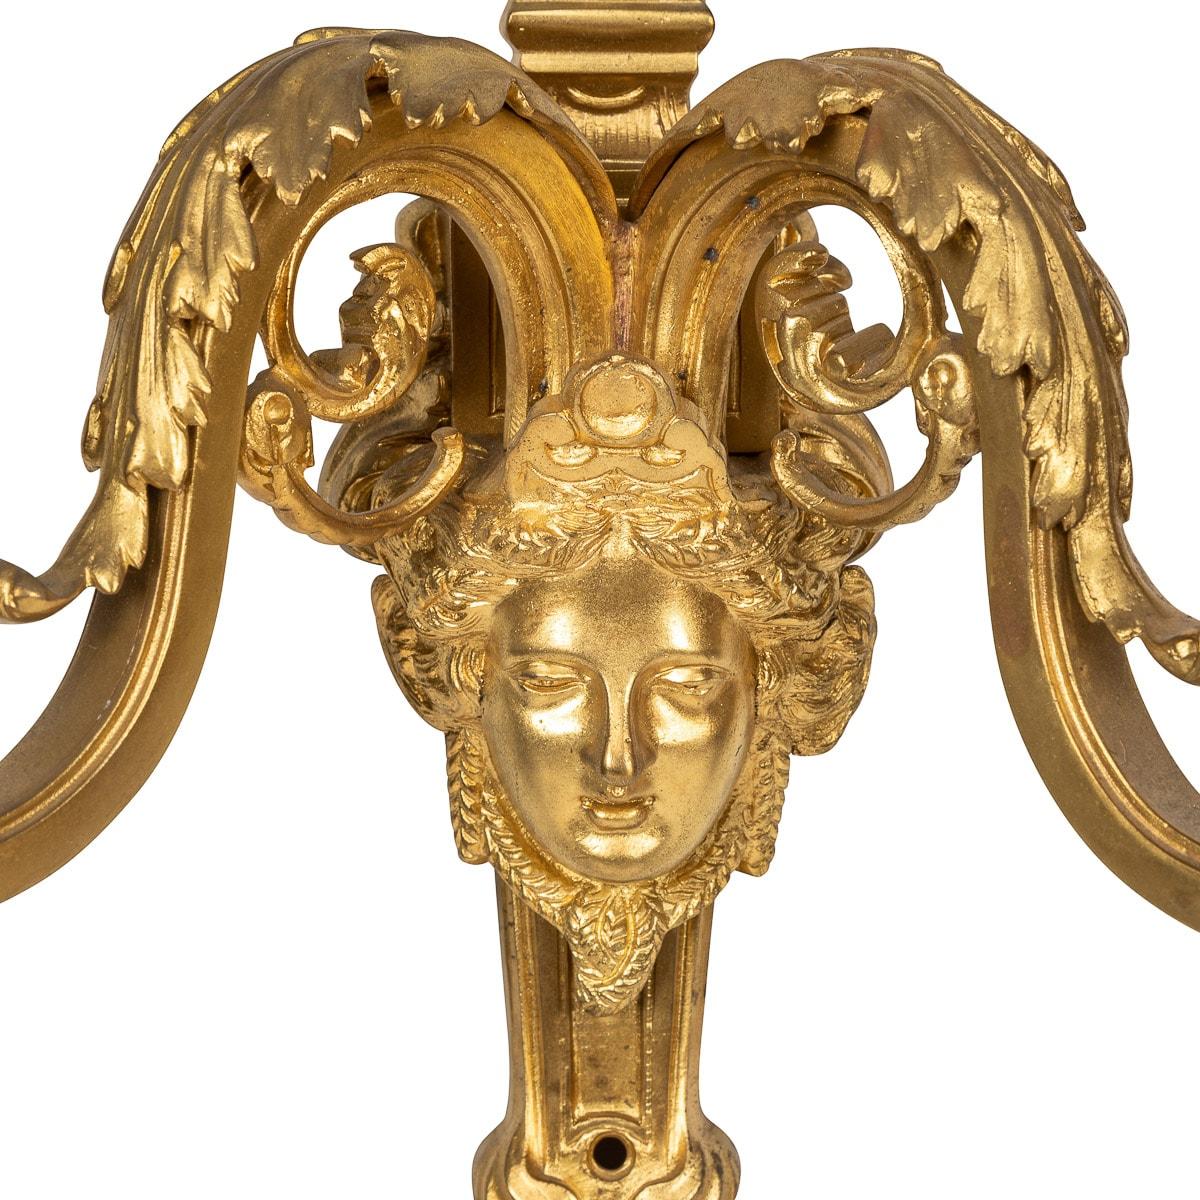 19th Century French Régence Style Ormolu D'appliques Wall Lights, C.1830 For Sale 2